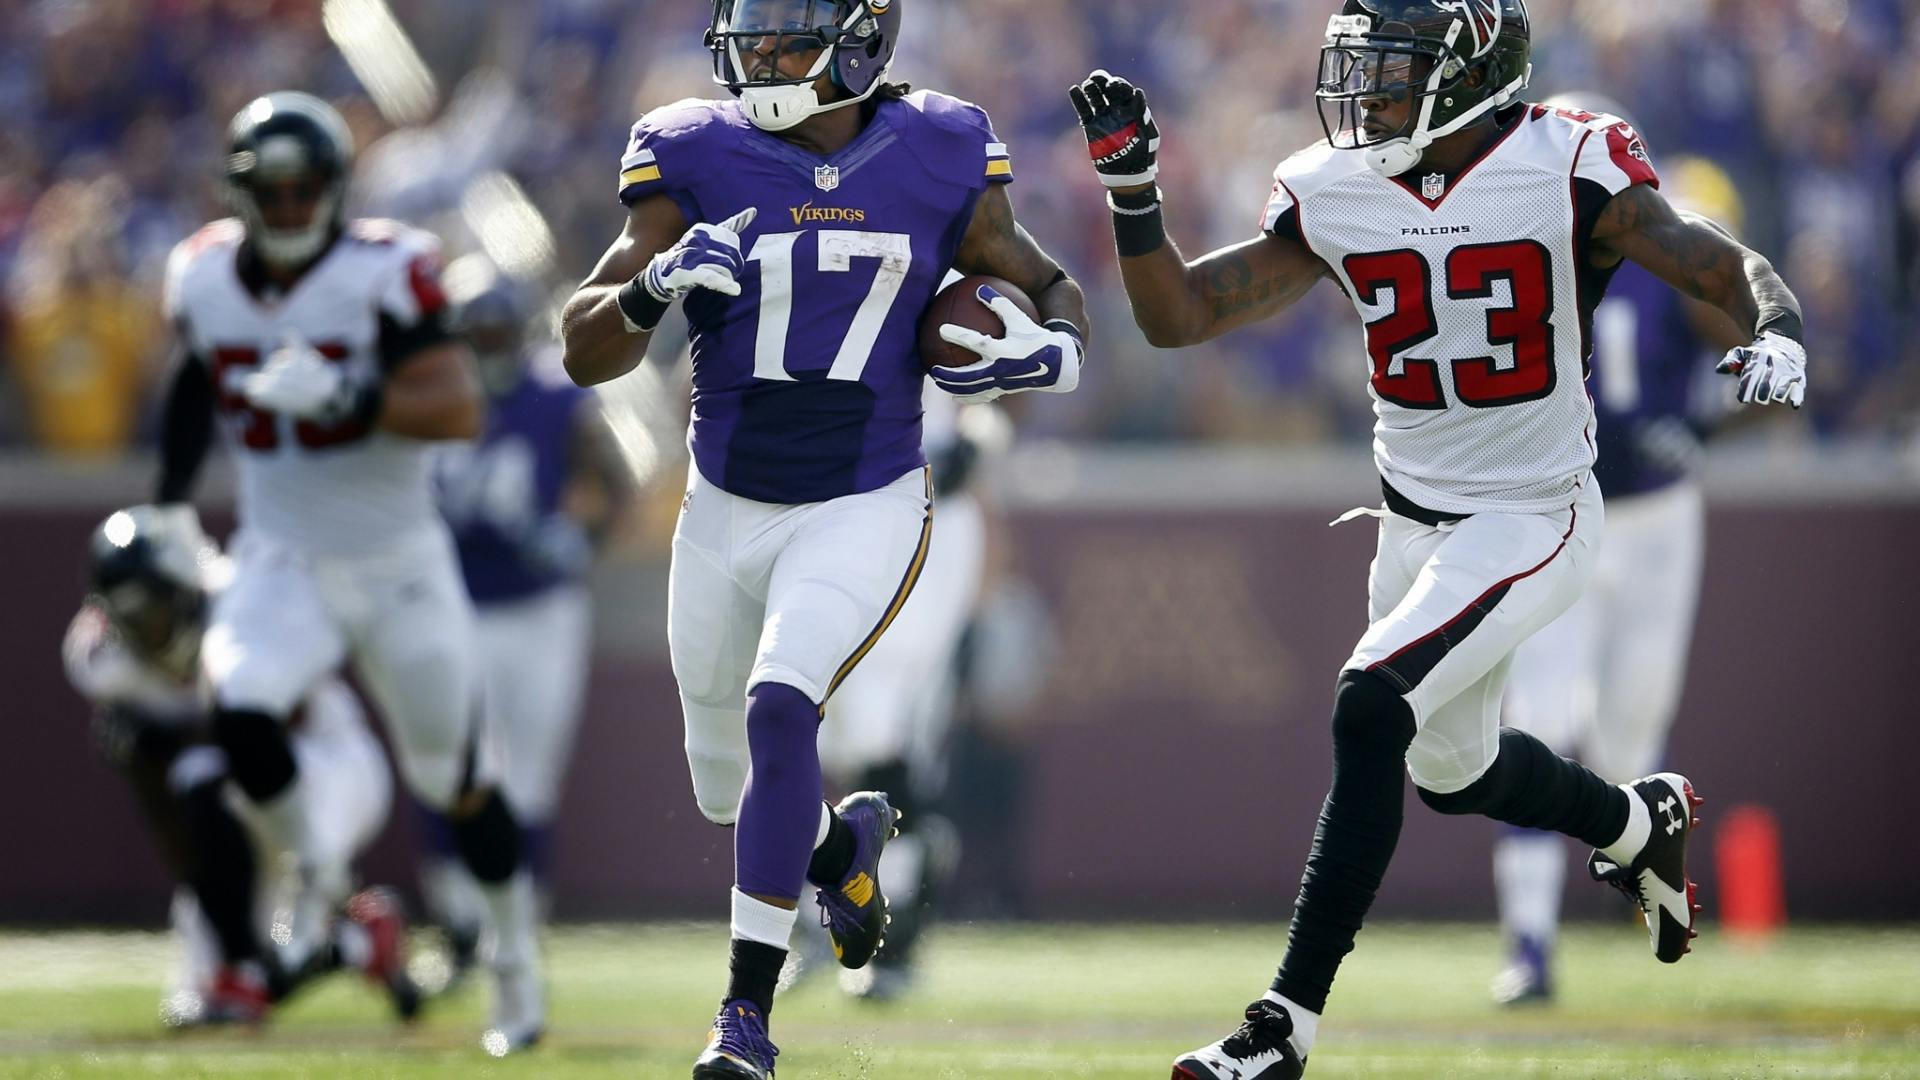 Vikings wide receiver Jarius Wright had a career-high eight catches for 132 yards in the 41-28 victory over the Falcons on Sunday at TCF Bank Stadium.